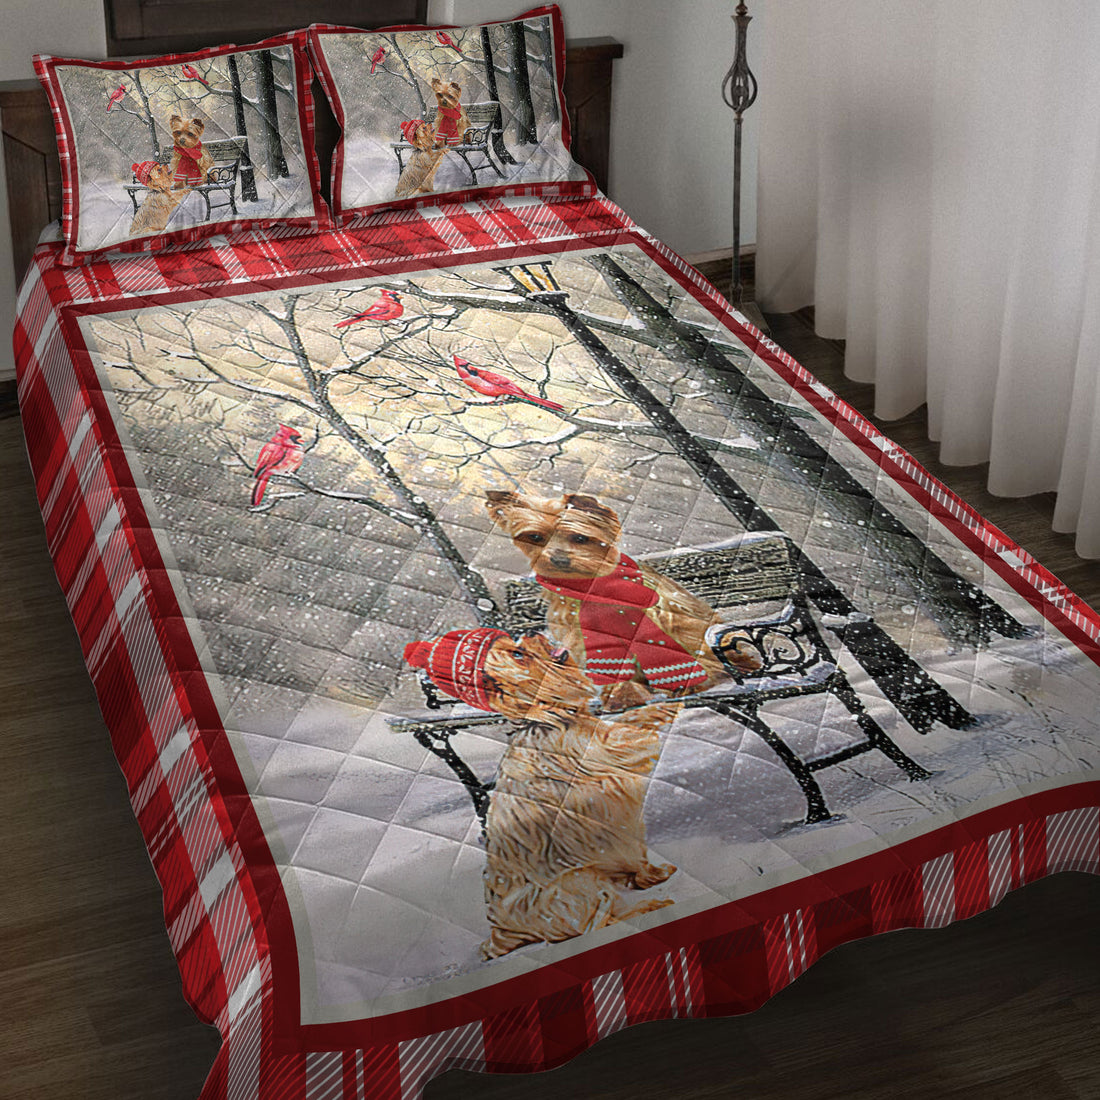 Ohaprints-Quilt-Bed-Set-Pillowcase-Yorkshire-Terrier-Yorkie-Hello-Christmas-Snowflake-Winter-Park-Blanket-Bedspread-Bedding-3982-Throw (55'' x 60'')